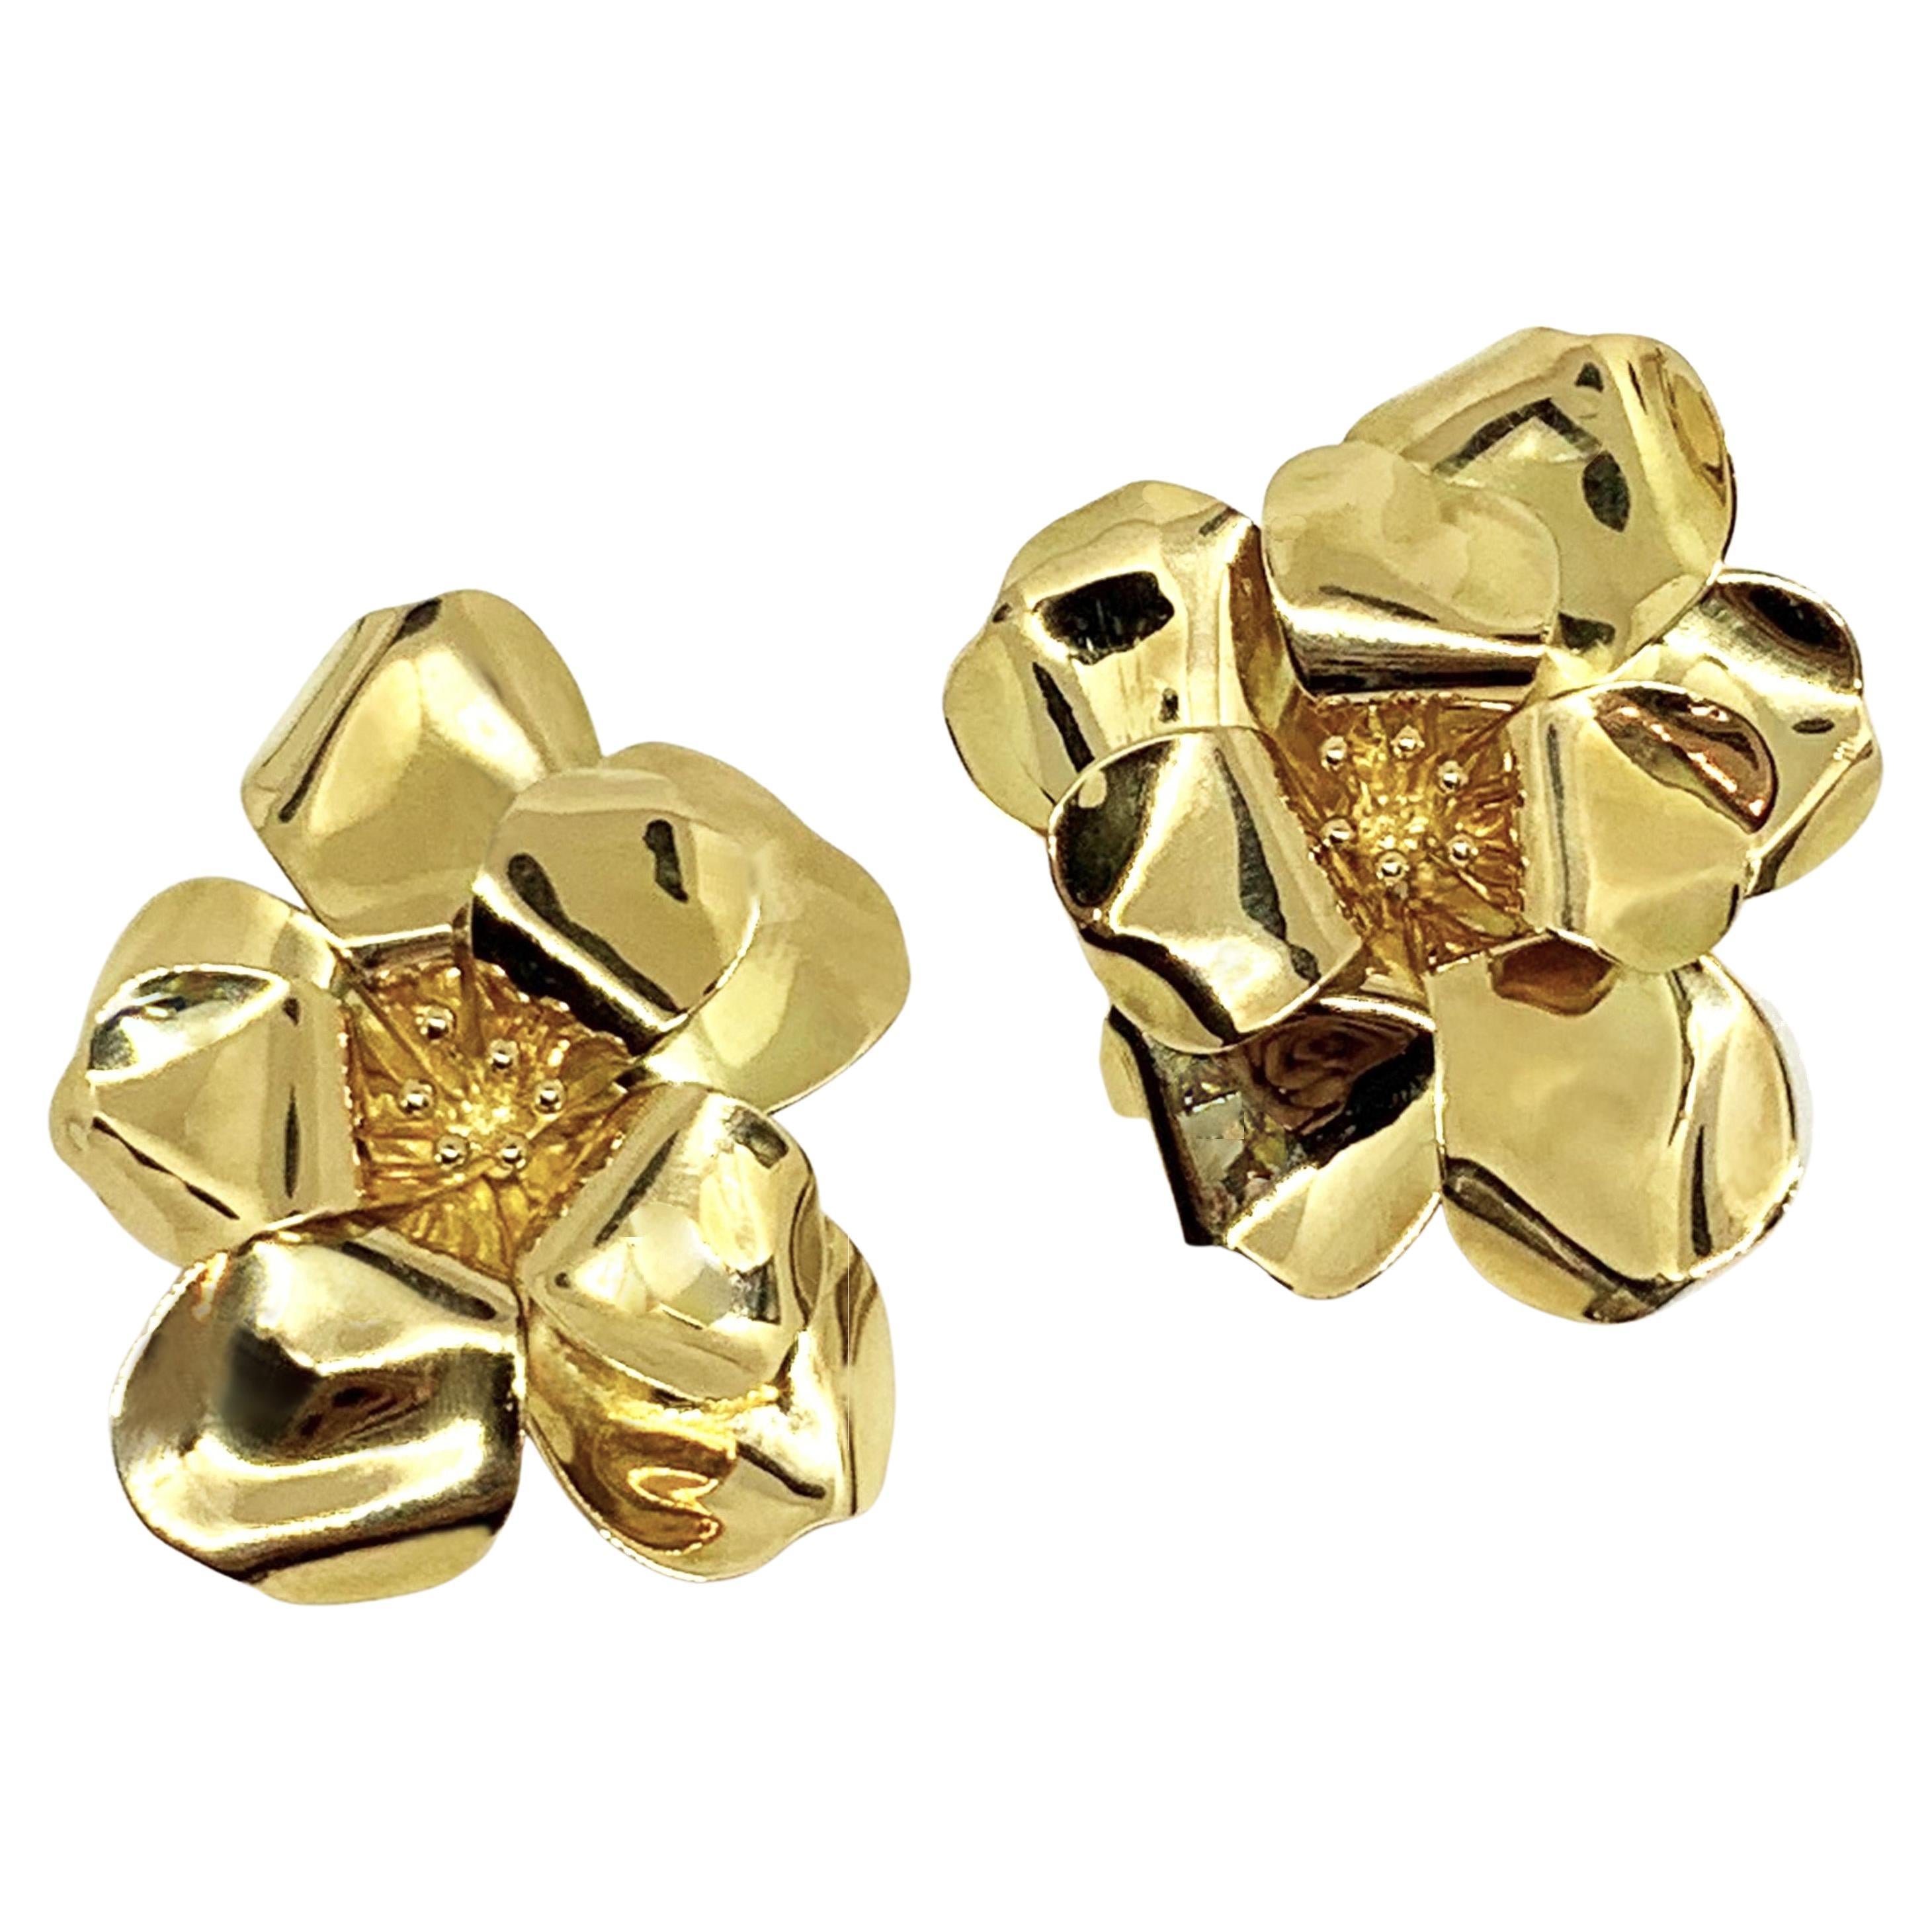 Rosior Contemporary "Flower" Earrings in Yellow Gold